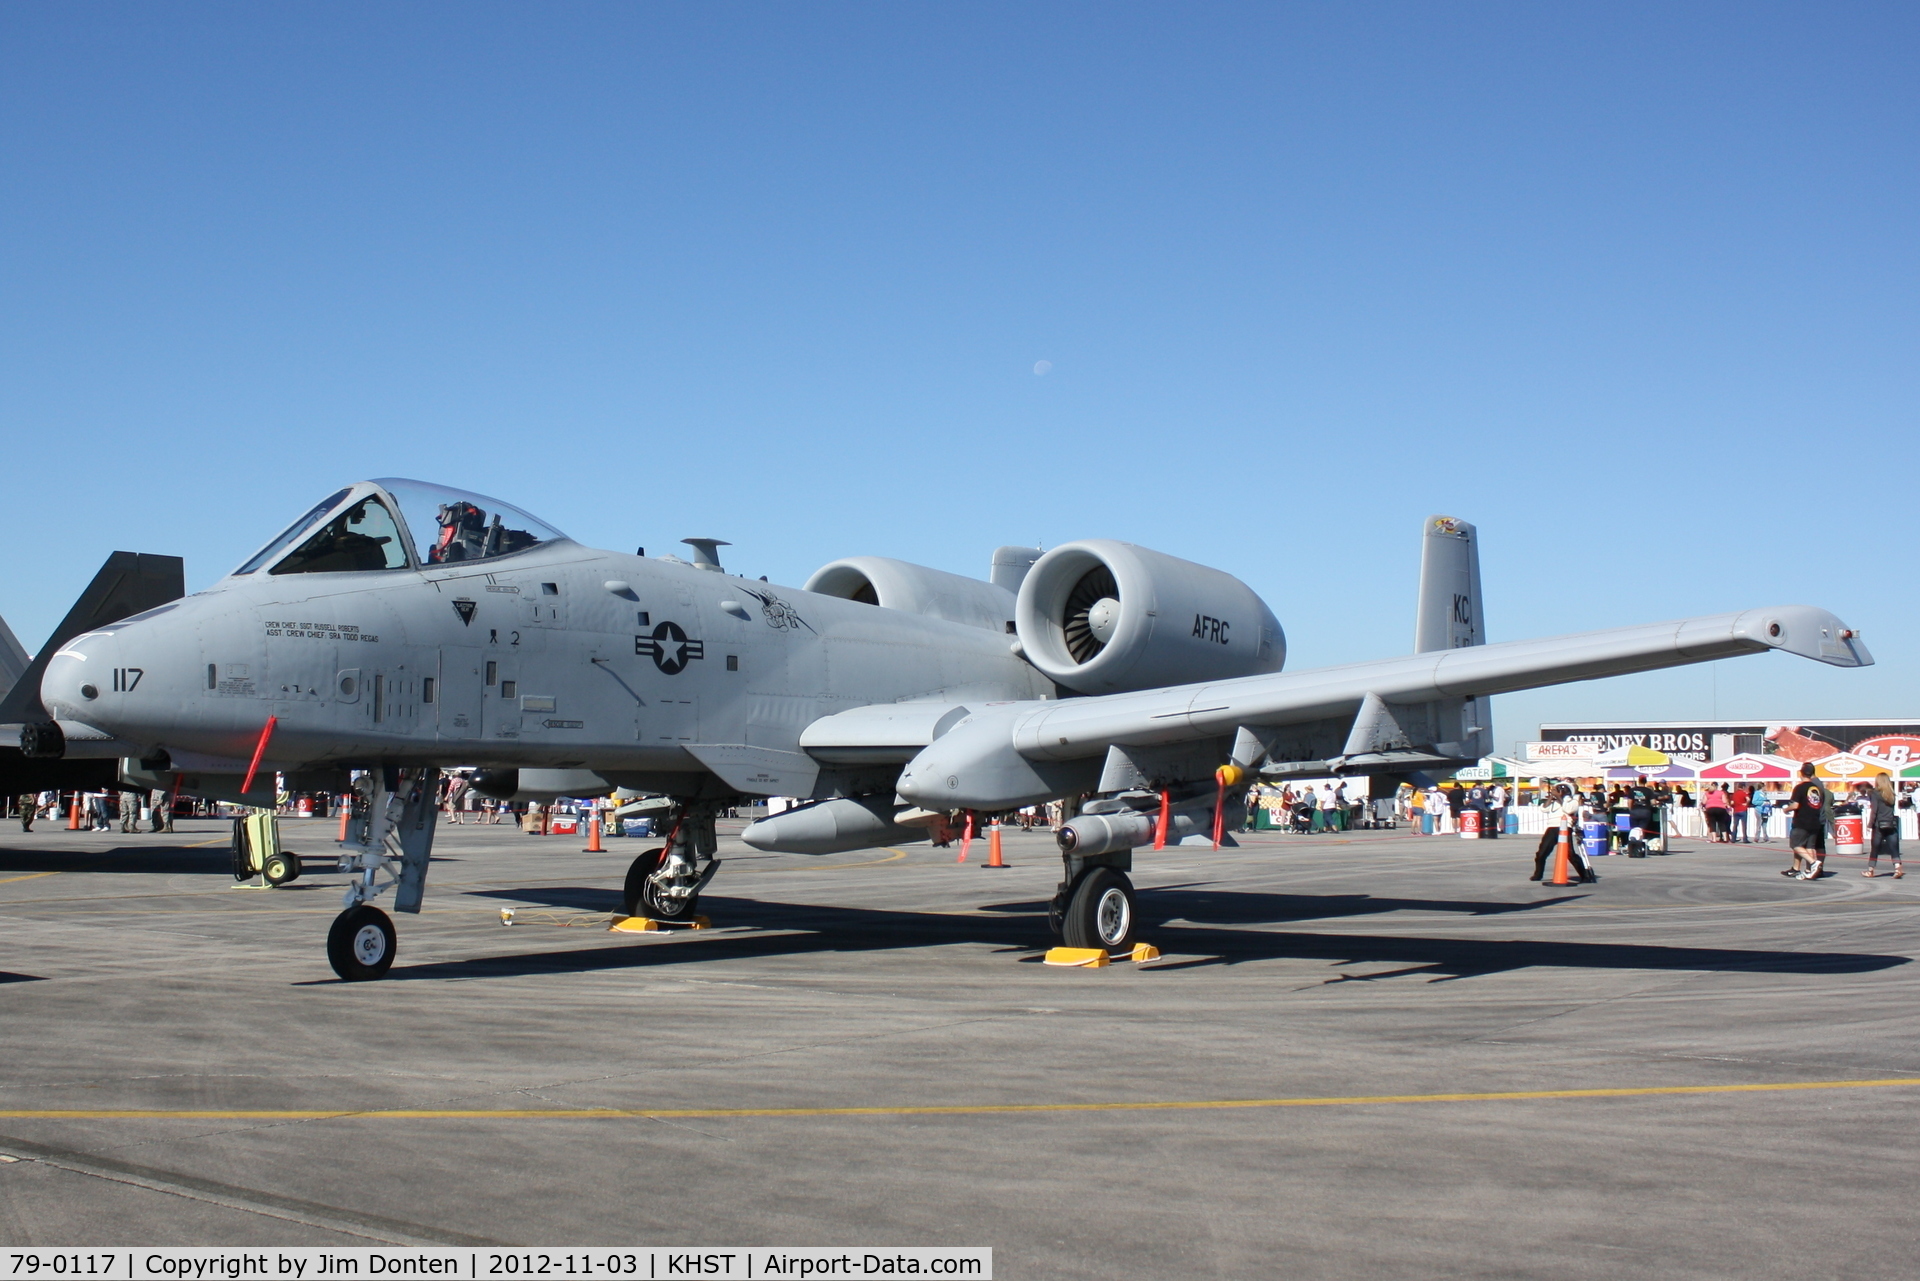 79-0117, 1979 Fairchild Republic A-10C Thunderbolt II C/N A10-0381, A-10 Thunderbolt II (79-117) from the 442nd Fighter Wing at Whiteman Air Force Base sits on static display at Wings over Homestead